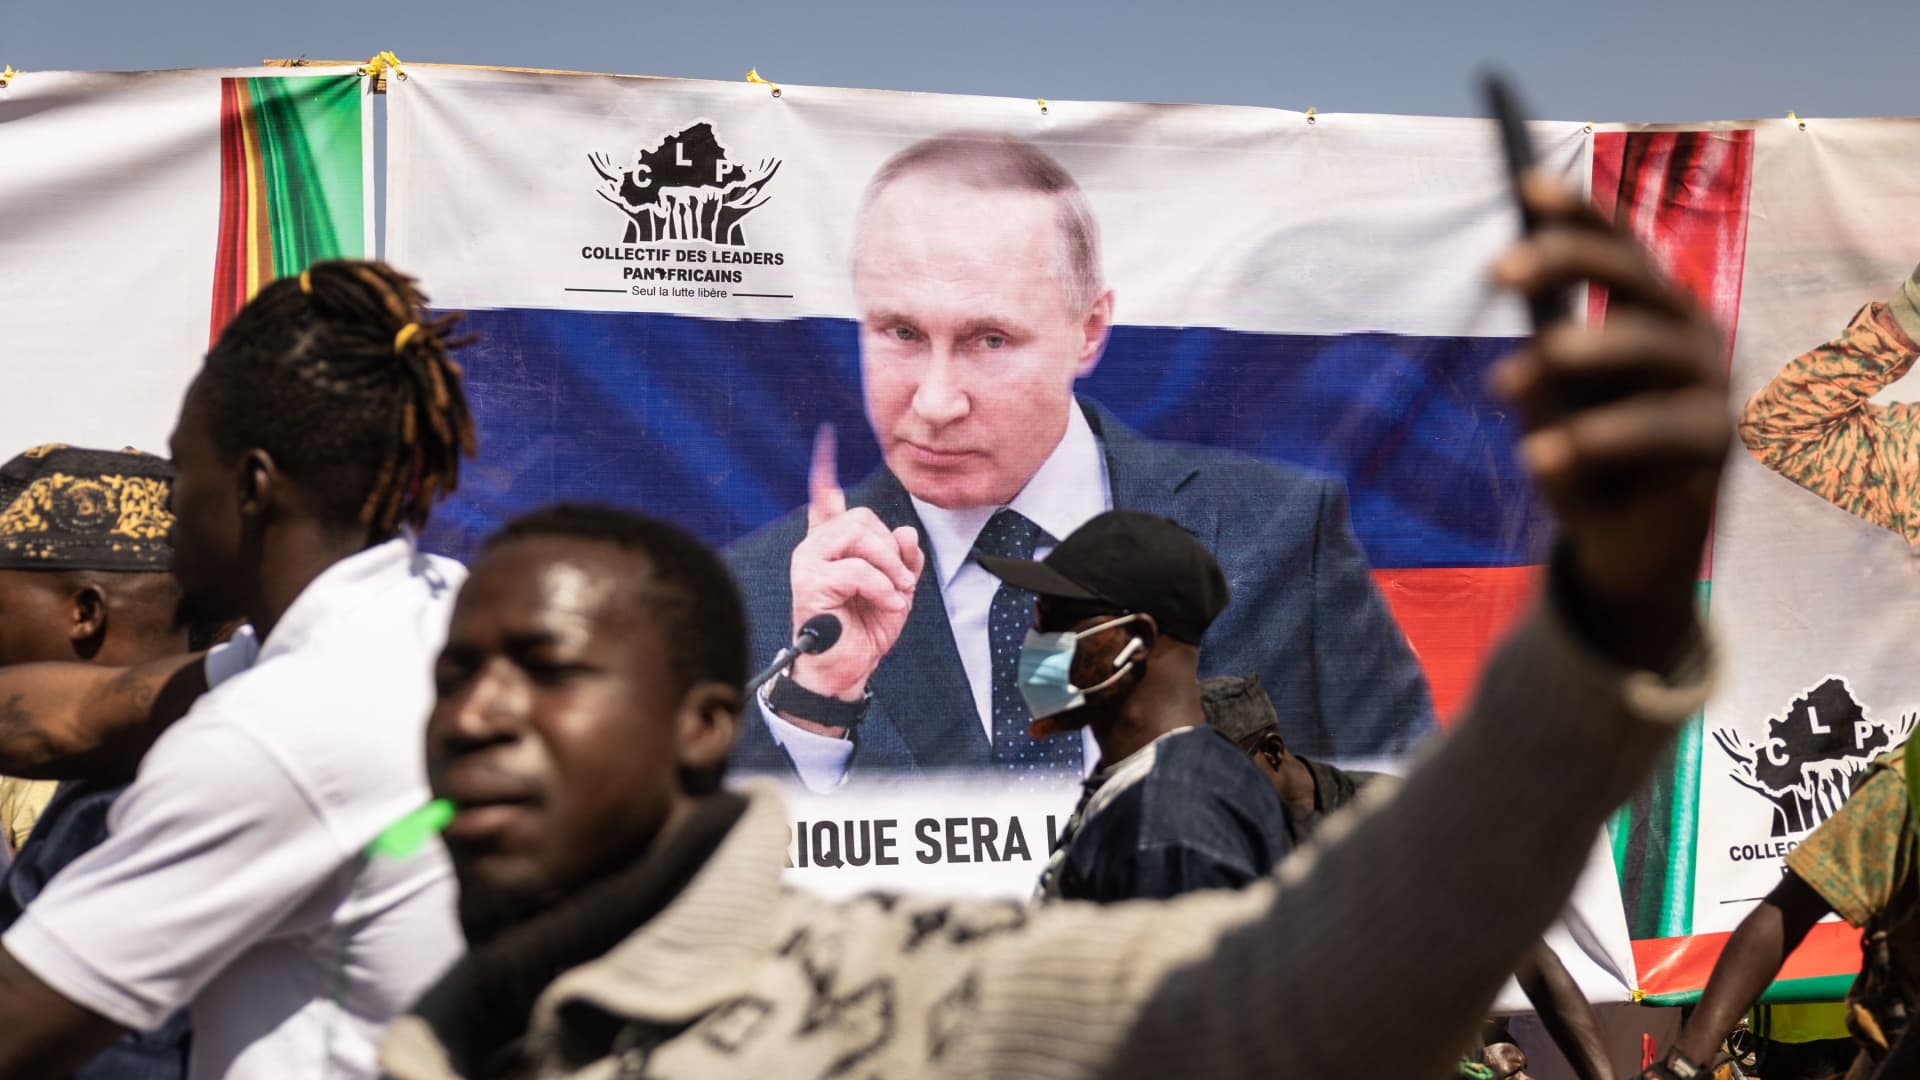 ‘It’s not a pretty picture’: Russia’s support is growing in the developing world